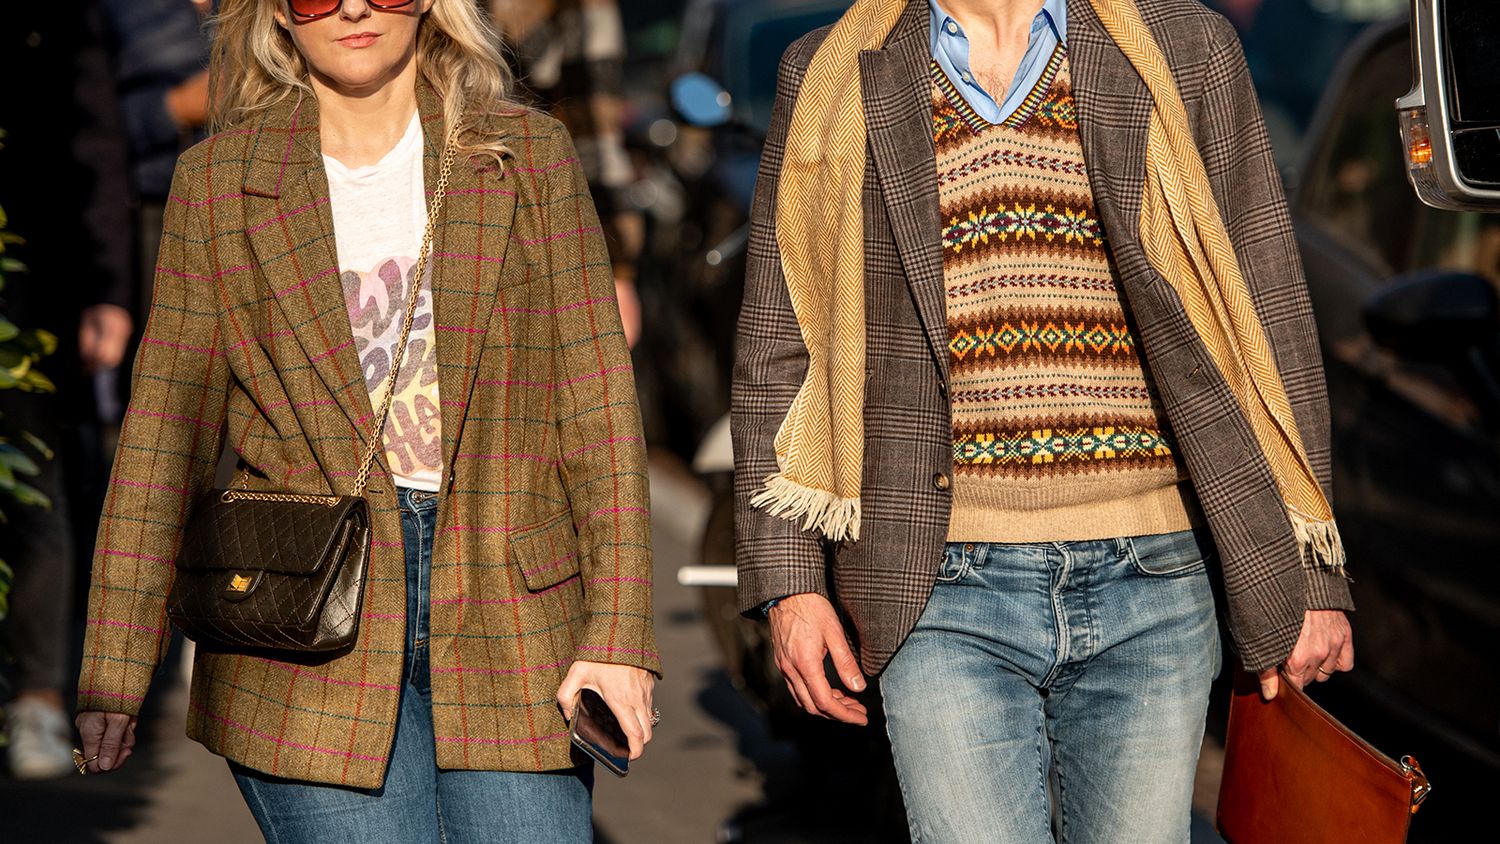 How To Look Great In Fair Isle Knitwear